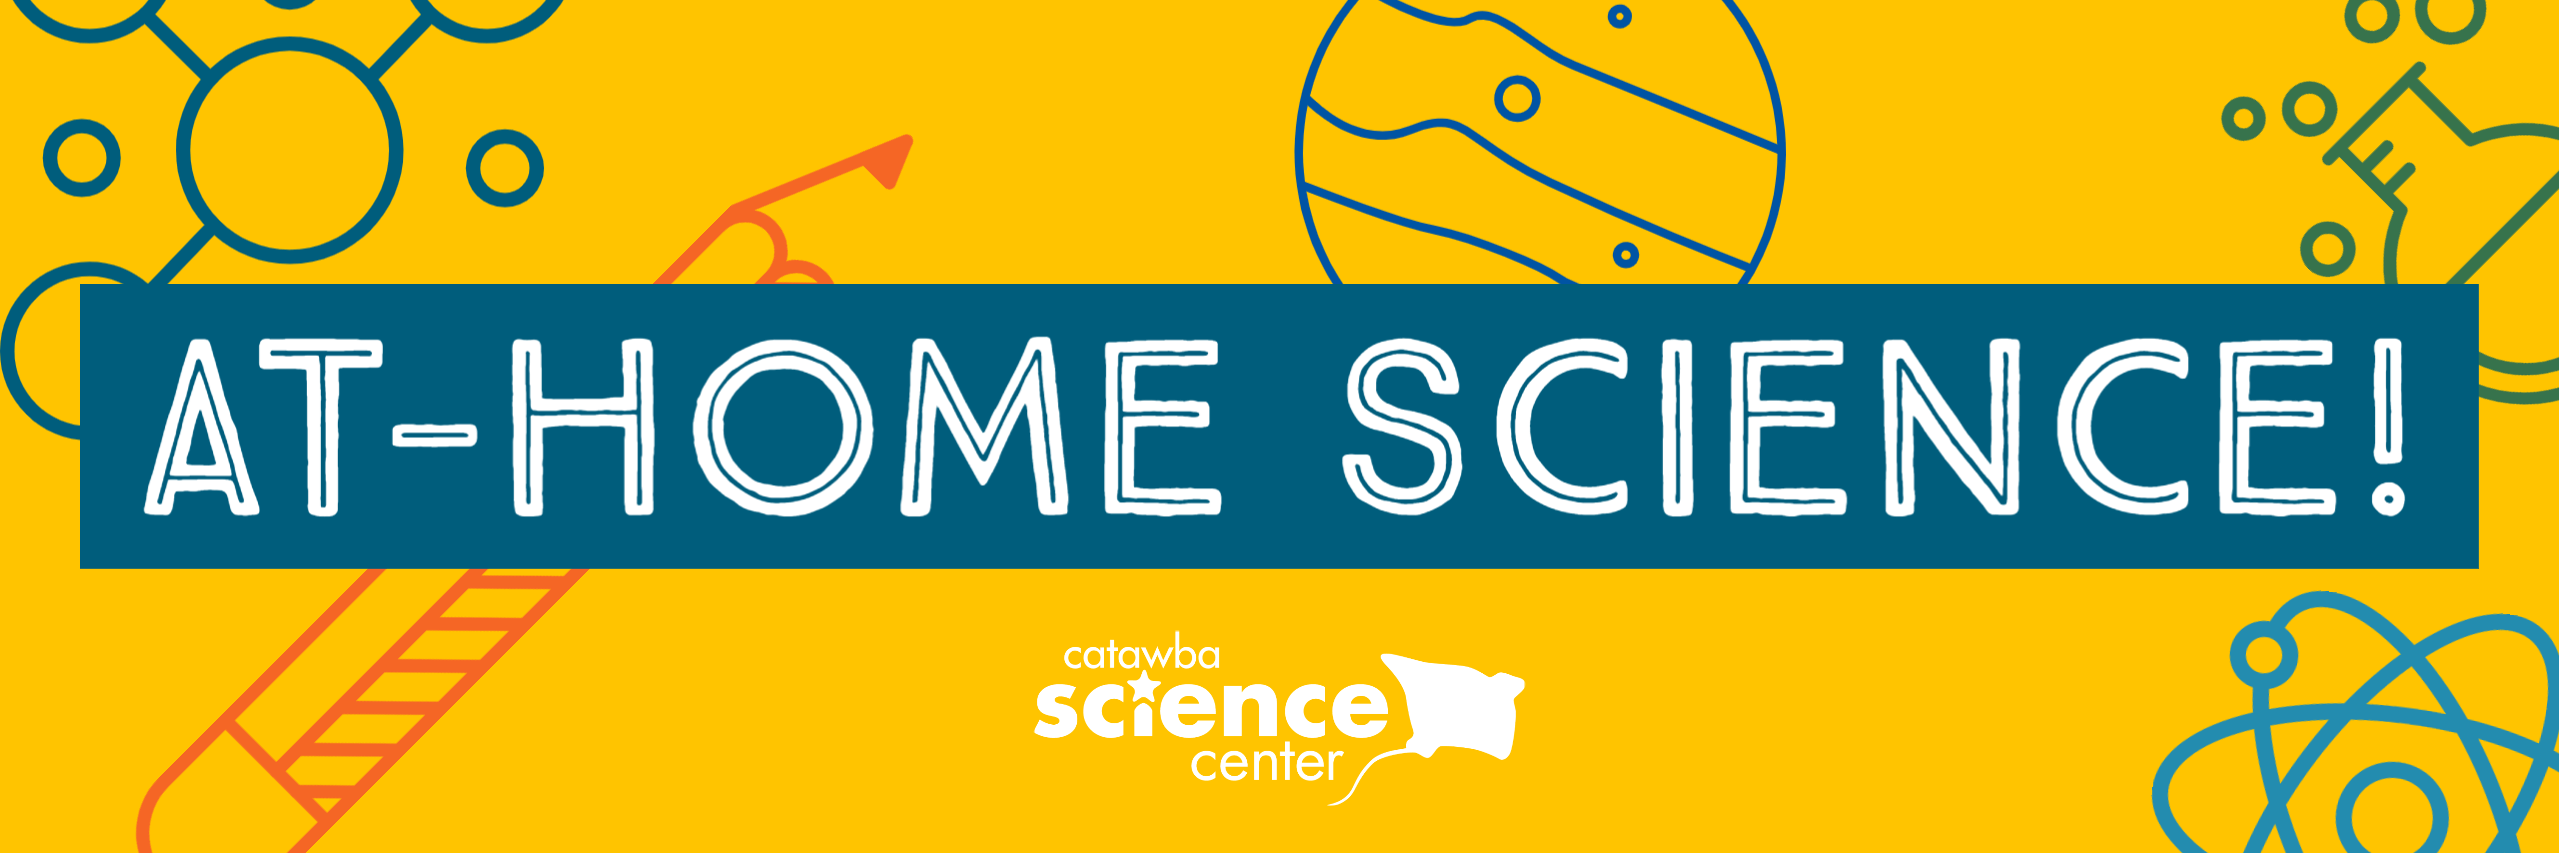 https://catawbascience.org/wp-content/uploads/2020/04/At-Home-Science-Banner.png